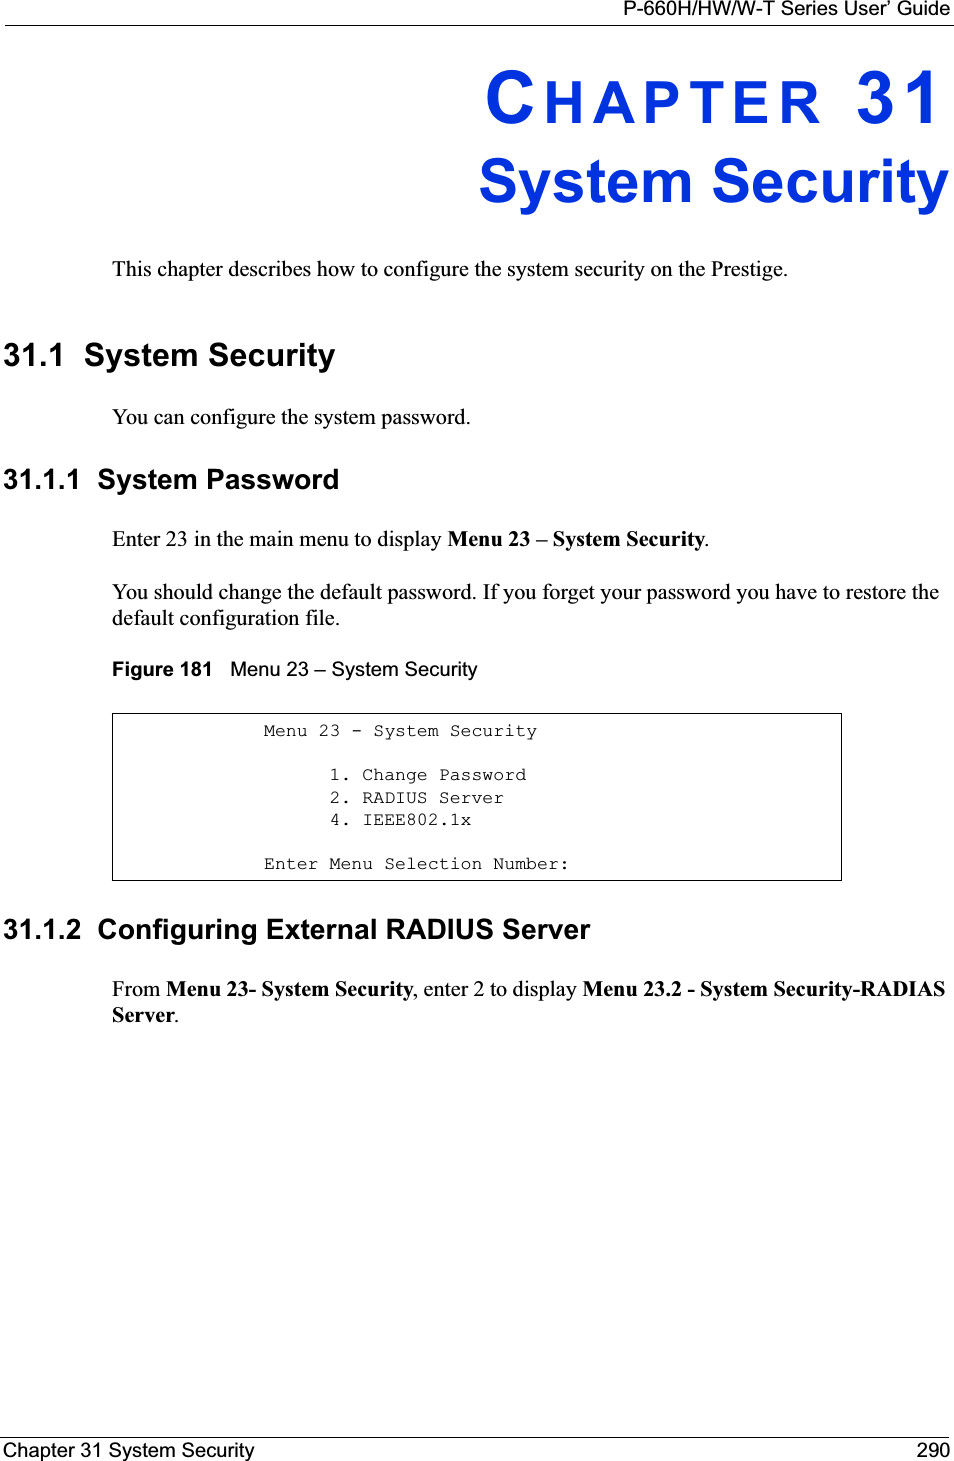 P-660H/HW/W-T Series User’ GuideChapter 31 System Security 290CHAPTER 31System SecurityThis chapter describes how to configure the system security on the Prestige.31.1  System SecurityYou can configure the system password.31.1.1  System PasswordEnter 23 in the main menu to display Menu 23 – System Security.You should change the default password. If you forget your password you have to restore the default configuration file. Figure 181   Menu 23 – System Security31.1.2  Configuring External RADIUS ServerFrom Menu 23- System Security, enter 2 to display Menu 23.2 - System Security-RADIAS Server.Menu 23 - System Security      1. Change Password      2. RADIUS Server      4. IEEE802.1xEnter Menu Selection Number: